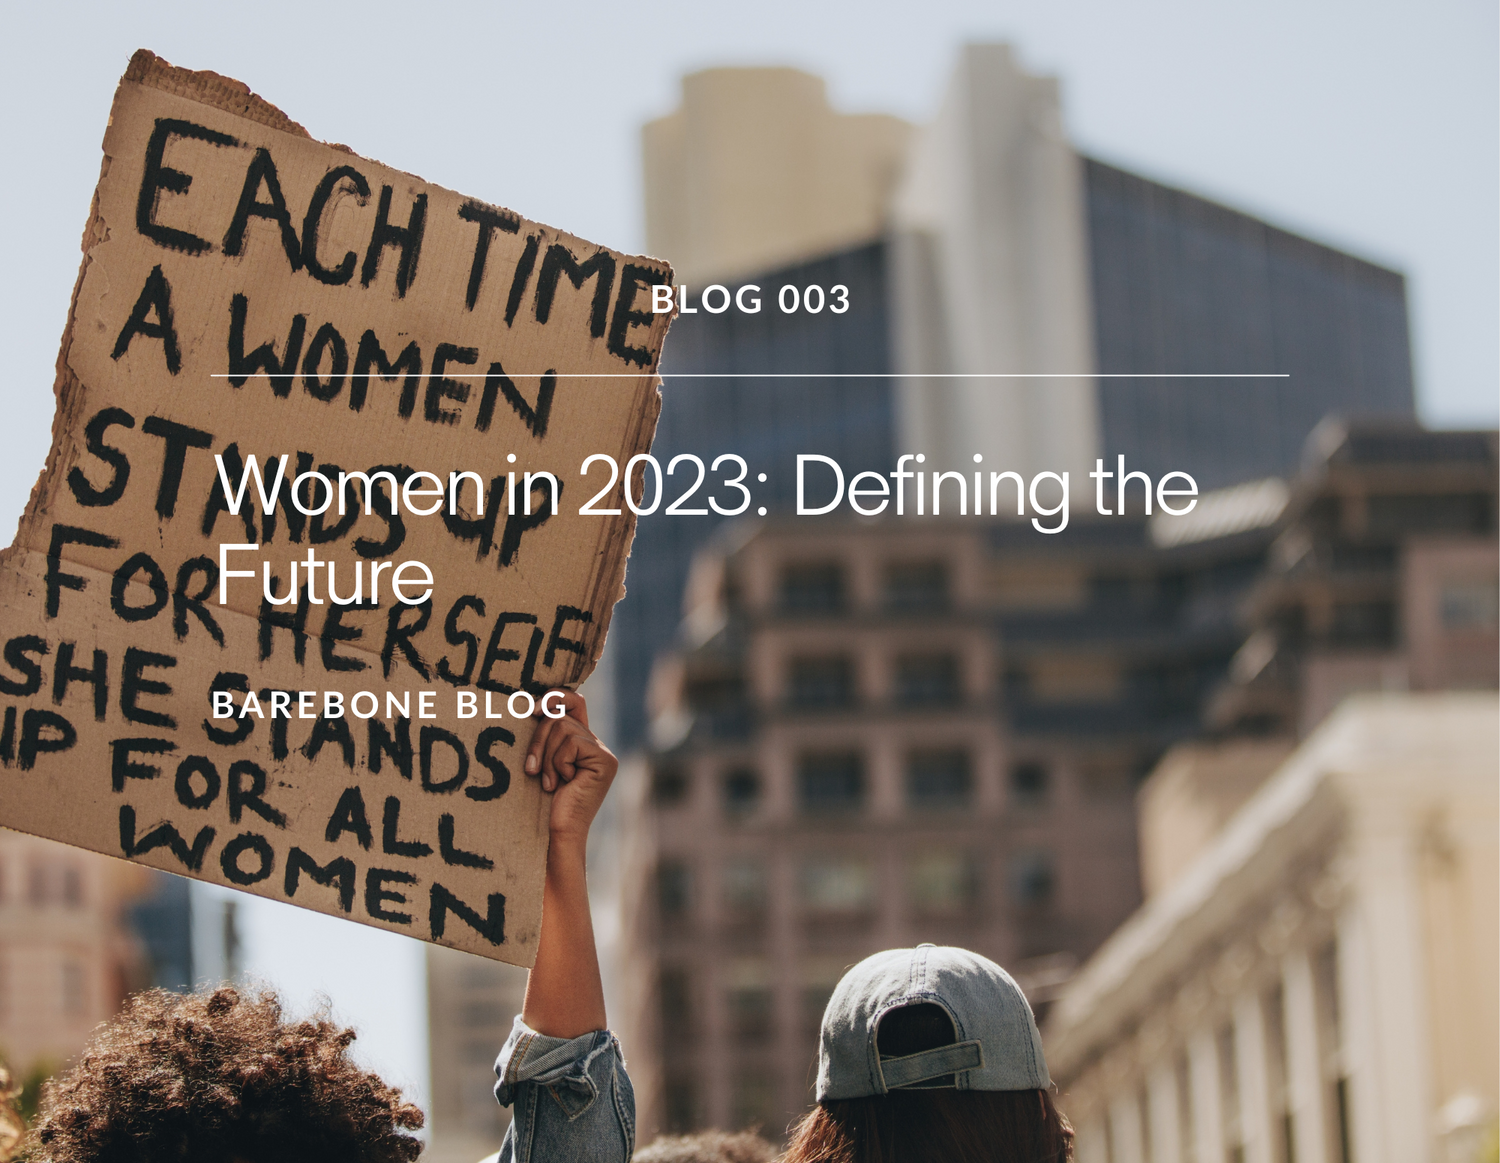 Women in 2023: Defining the Future